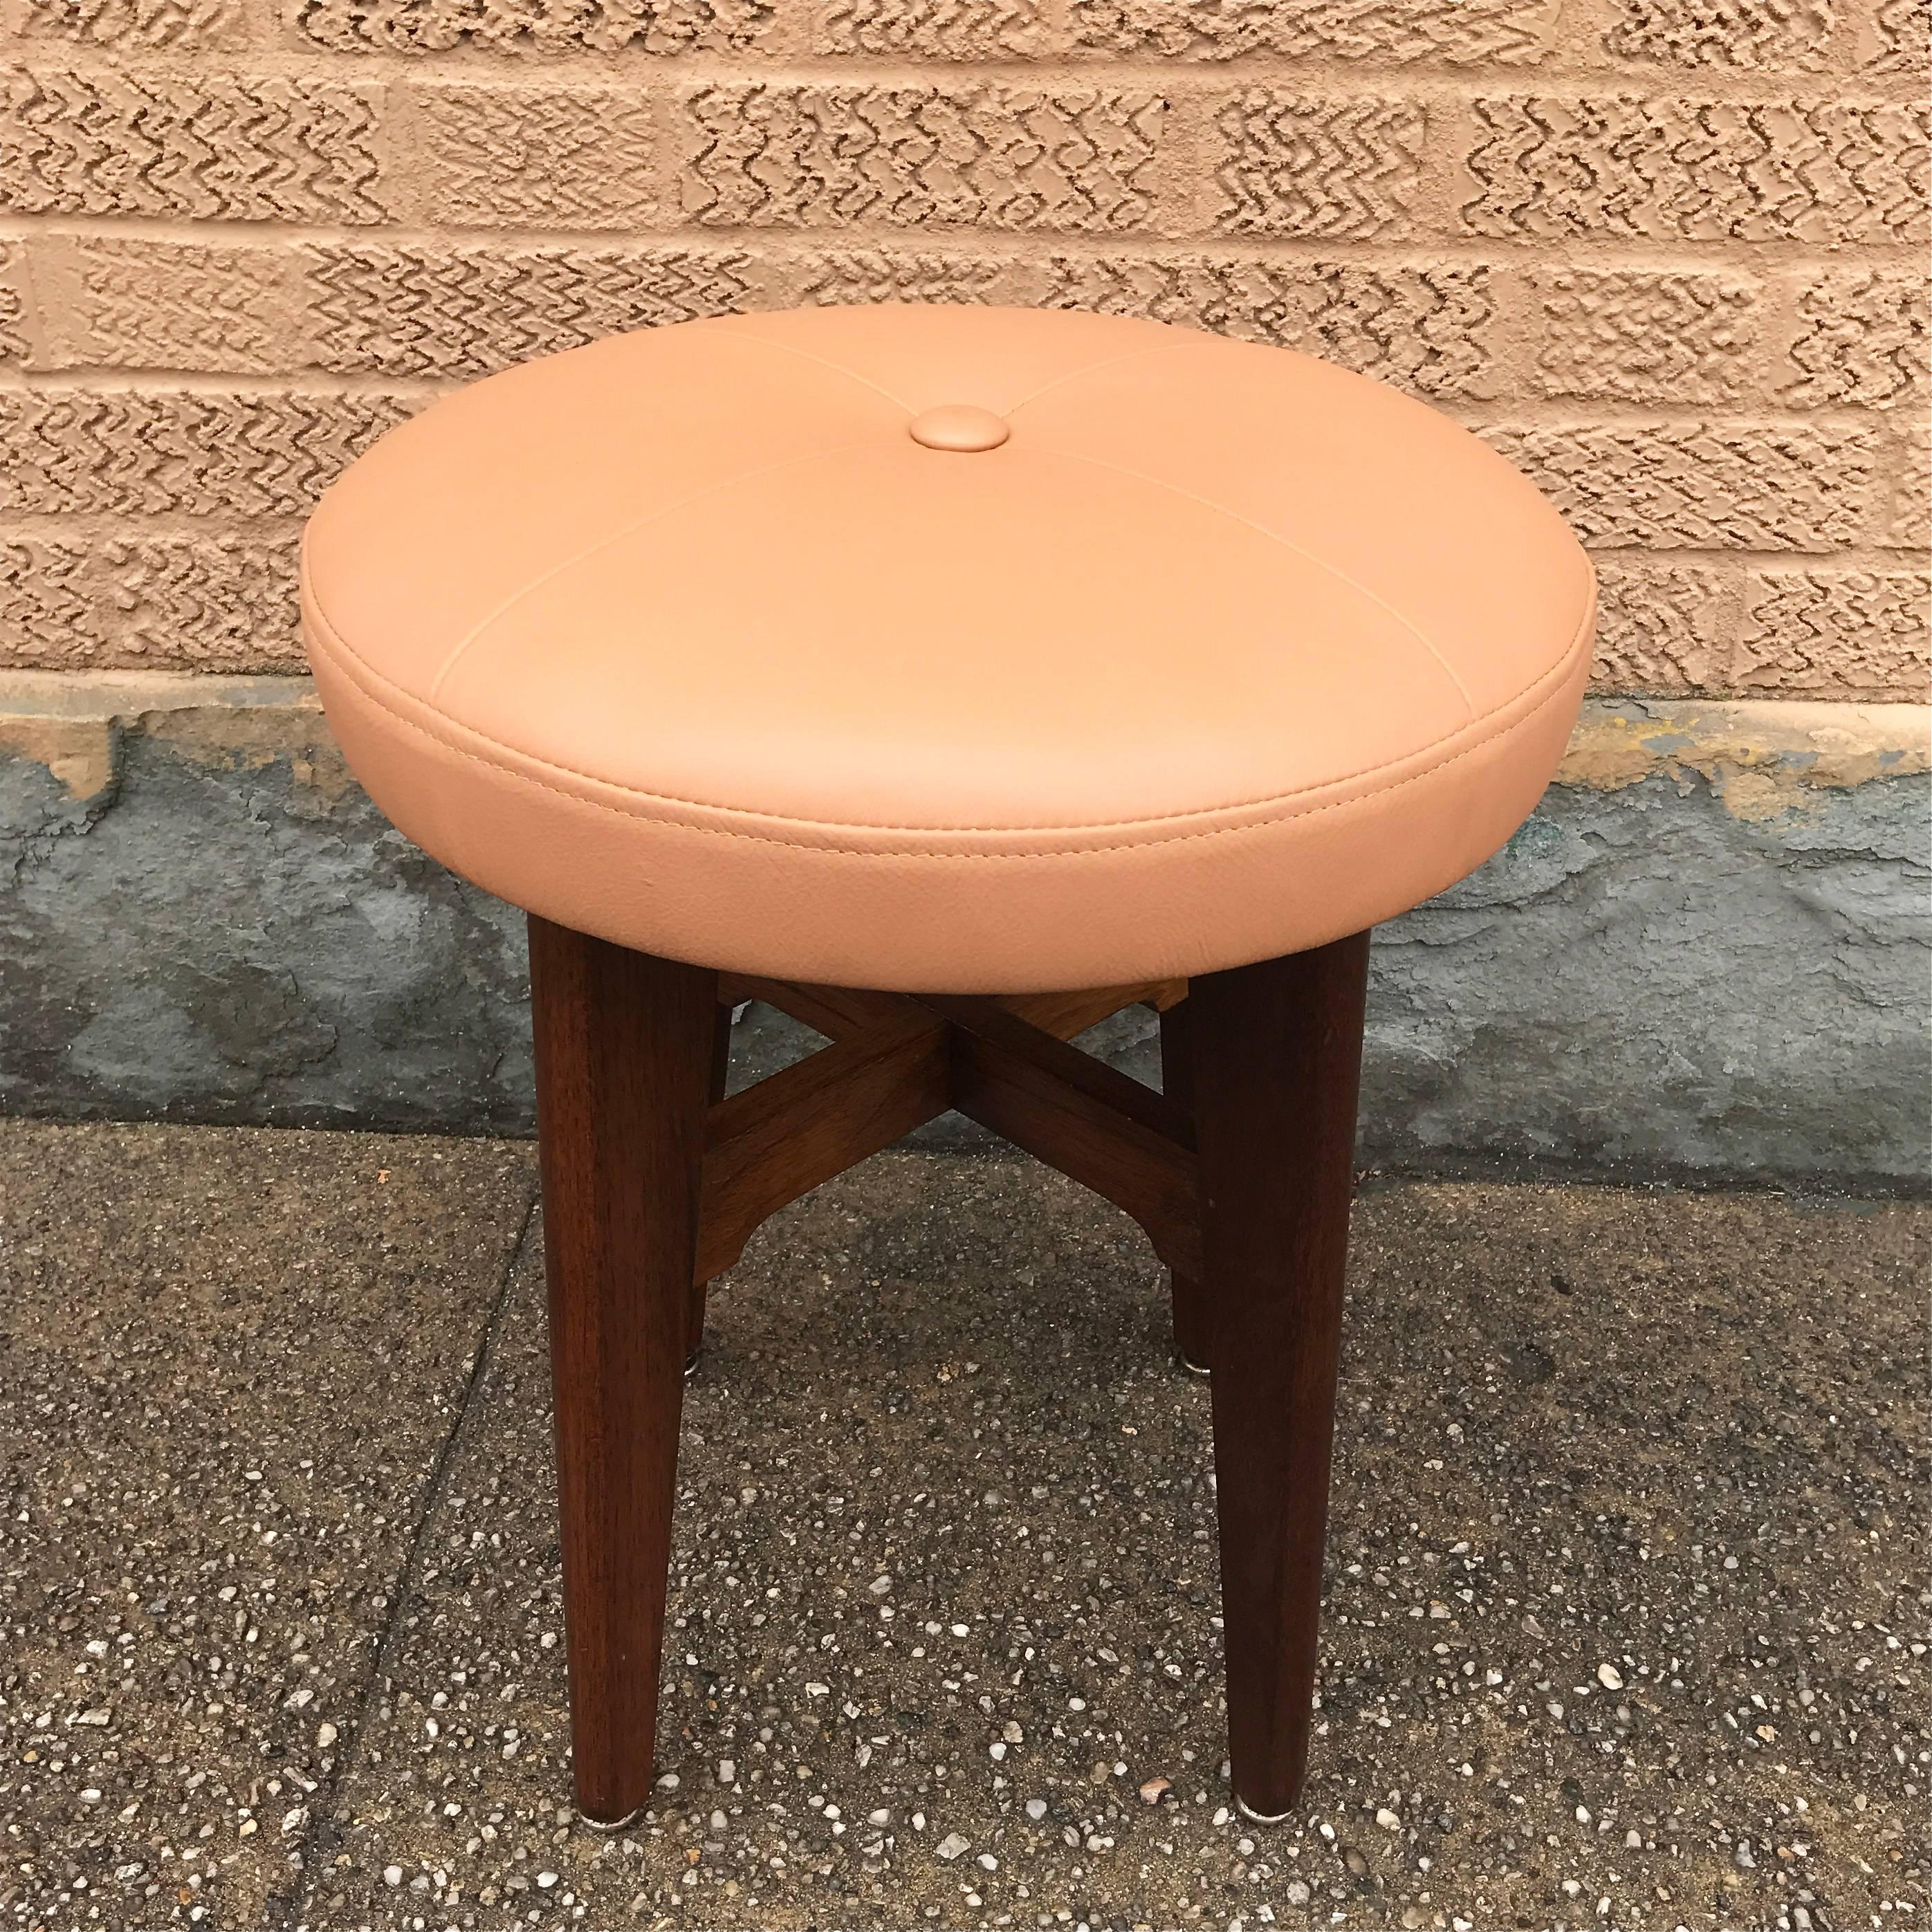 Mid-Century Modern vanity stool features a walnut base and peach leather upholstered seat.